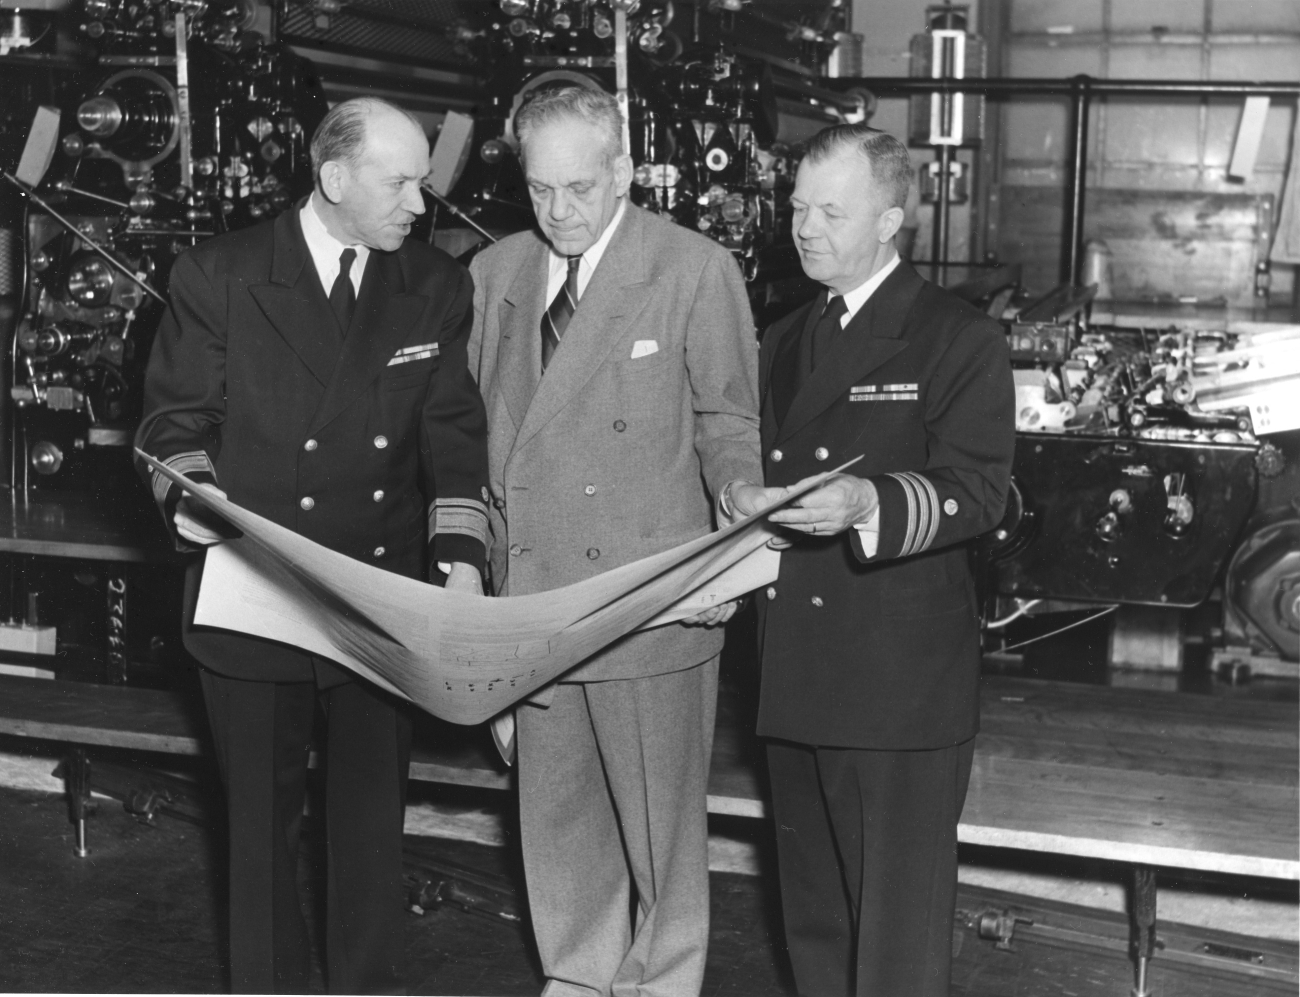 Congressman Campbell of Florida being briefed on chart printing process byRear Admiral Robert Studds and Commander Alvin C